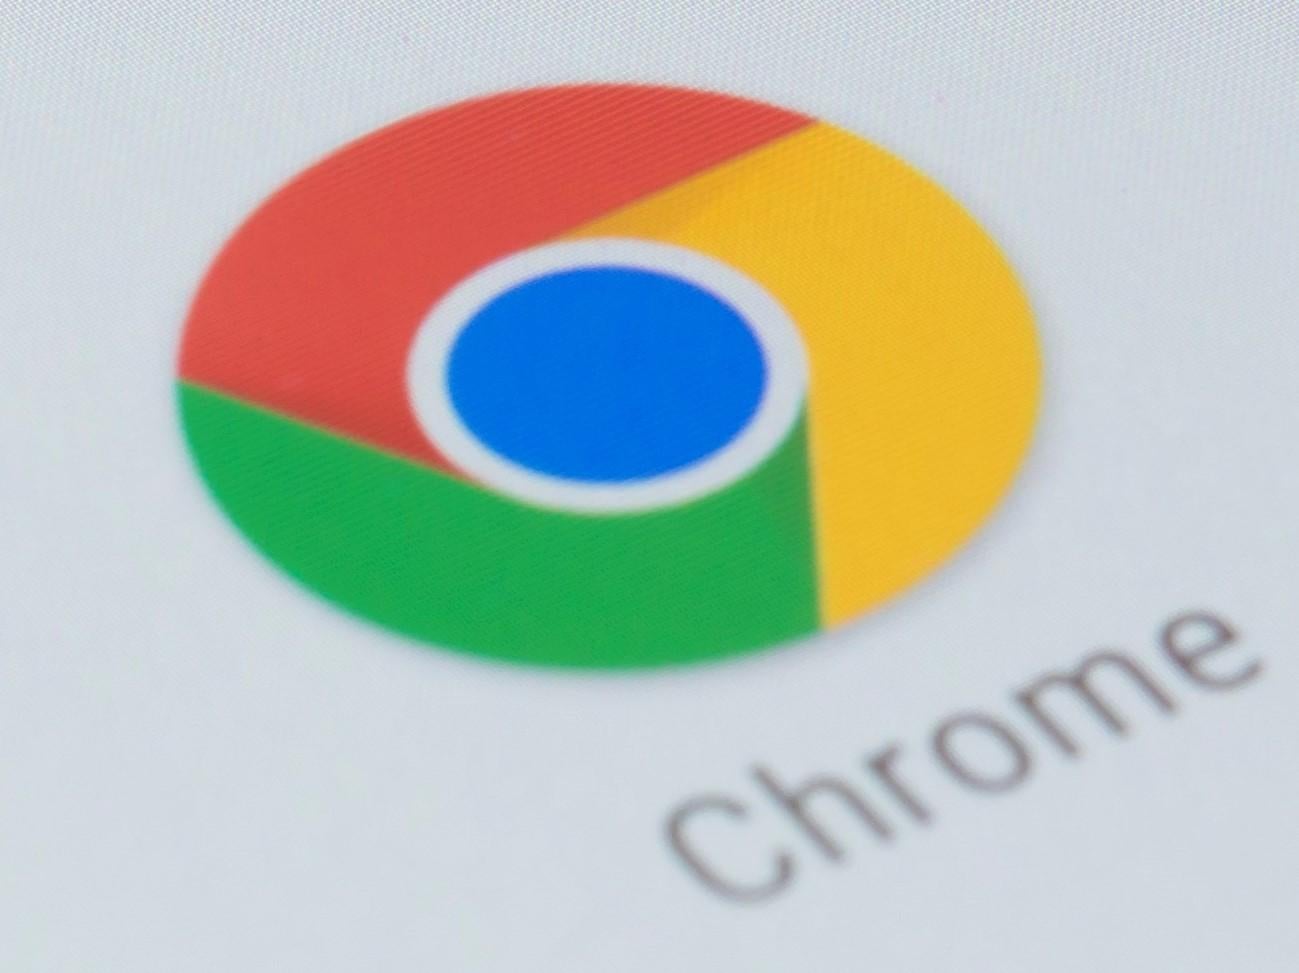 Google is updating Chrome to make it impossible for websites to see if visitors are using a private browsing mode